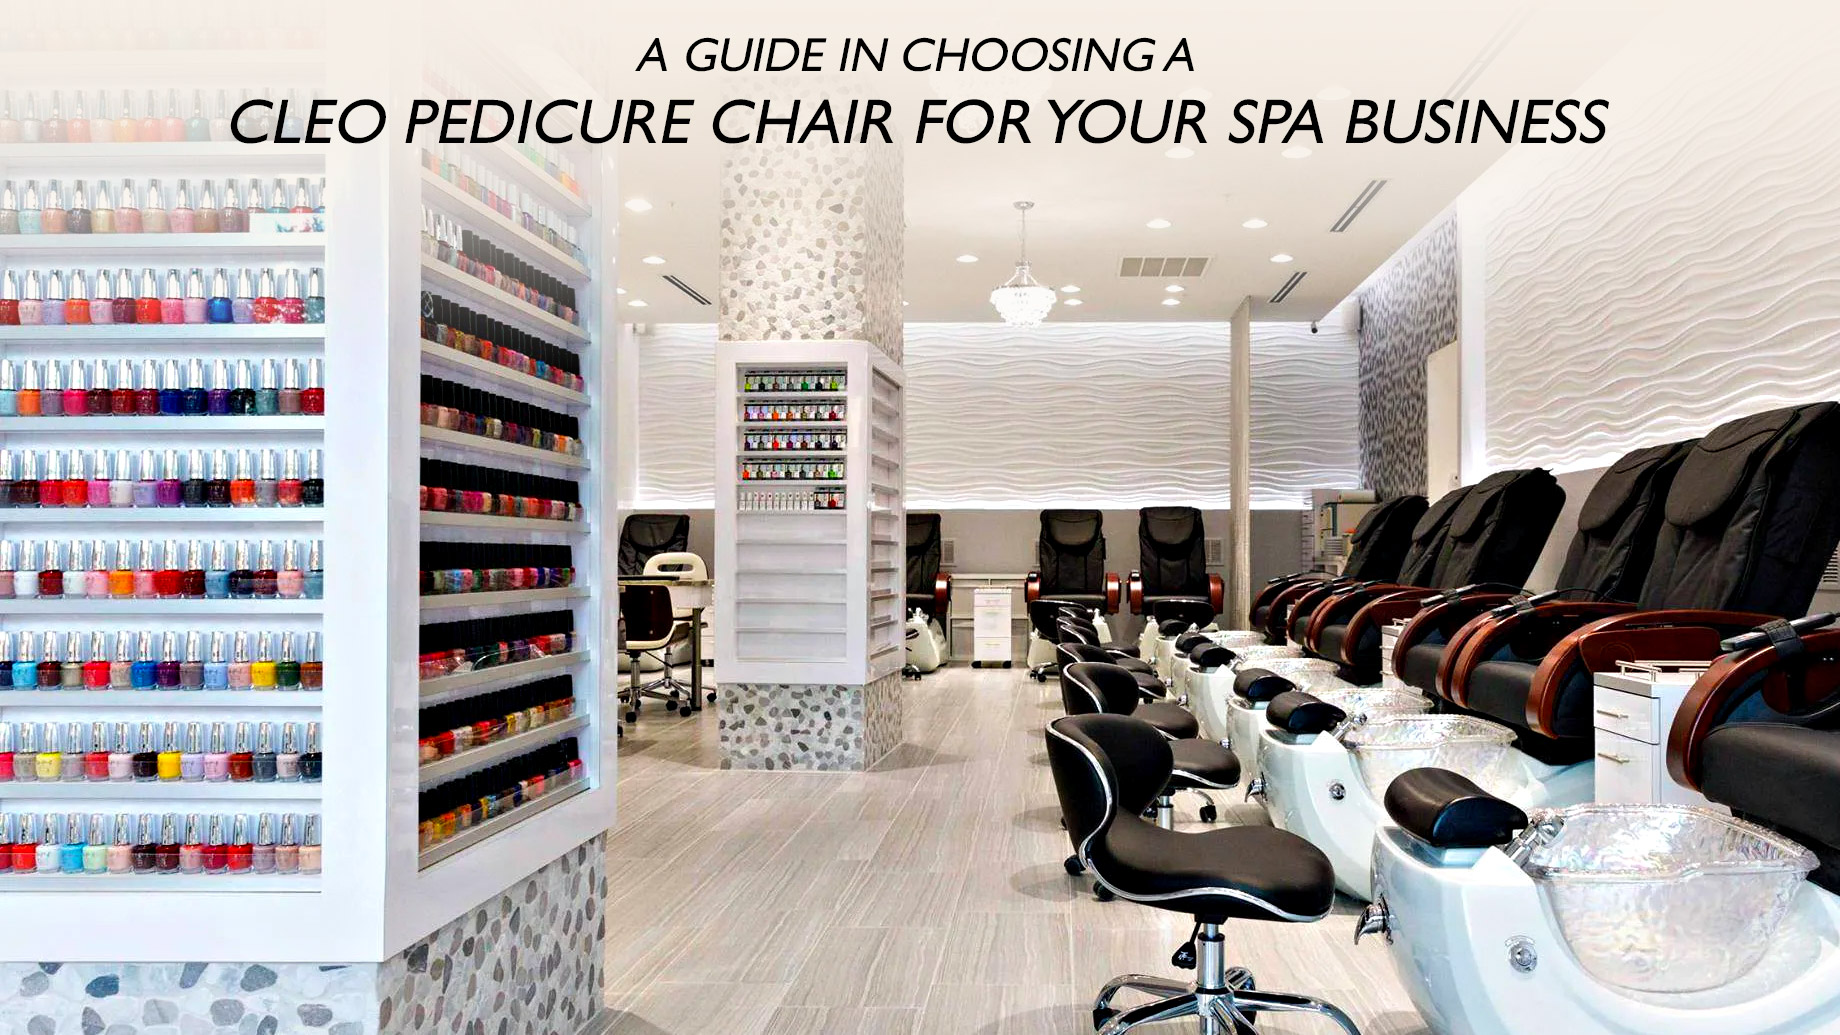 A Guide in Choosing a Cleo Pedicure Chair for Your Spa Business